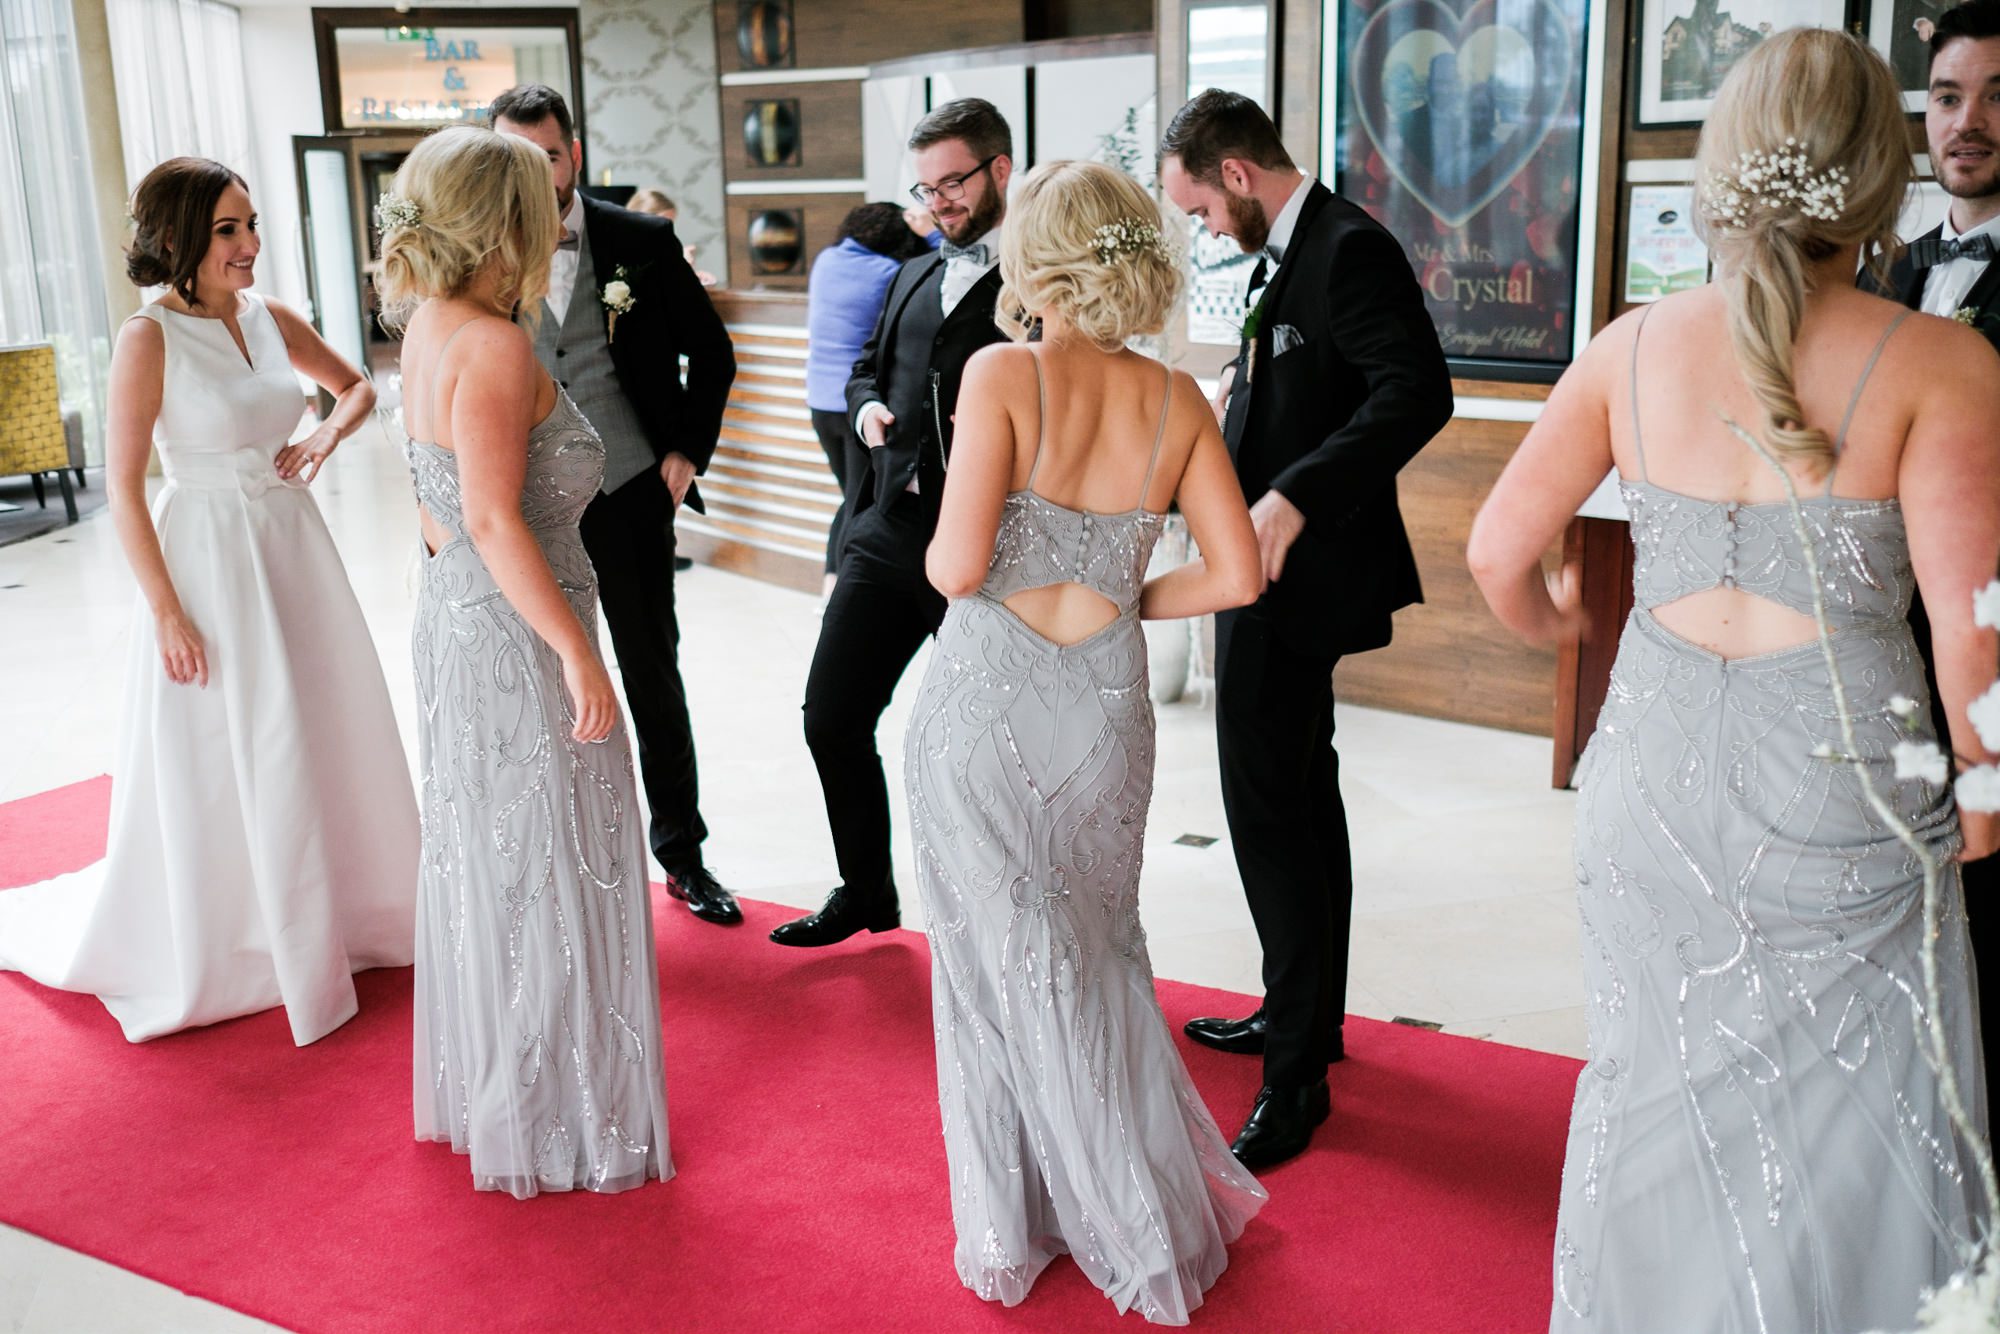 bridal party warming up for their entrance